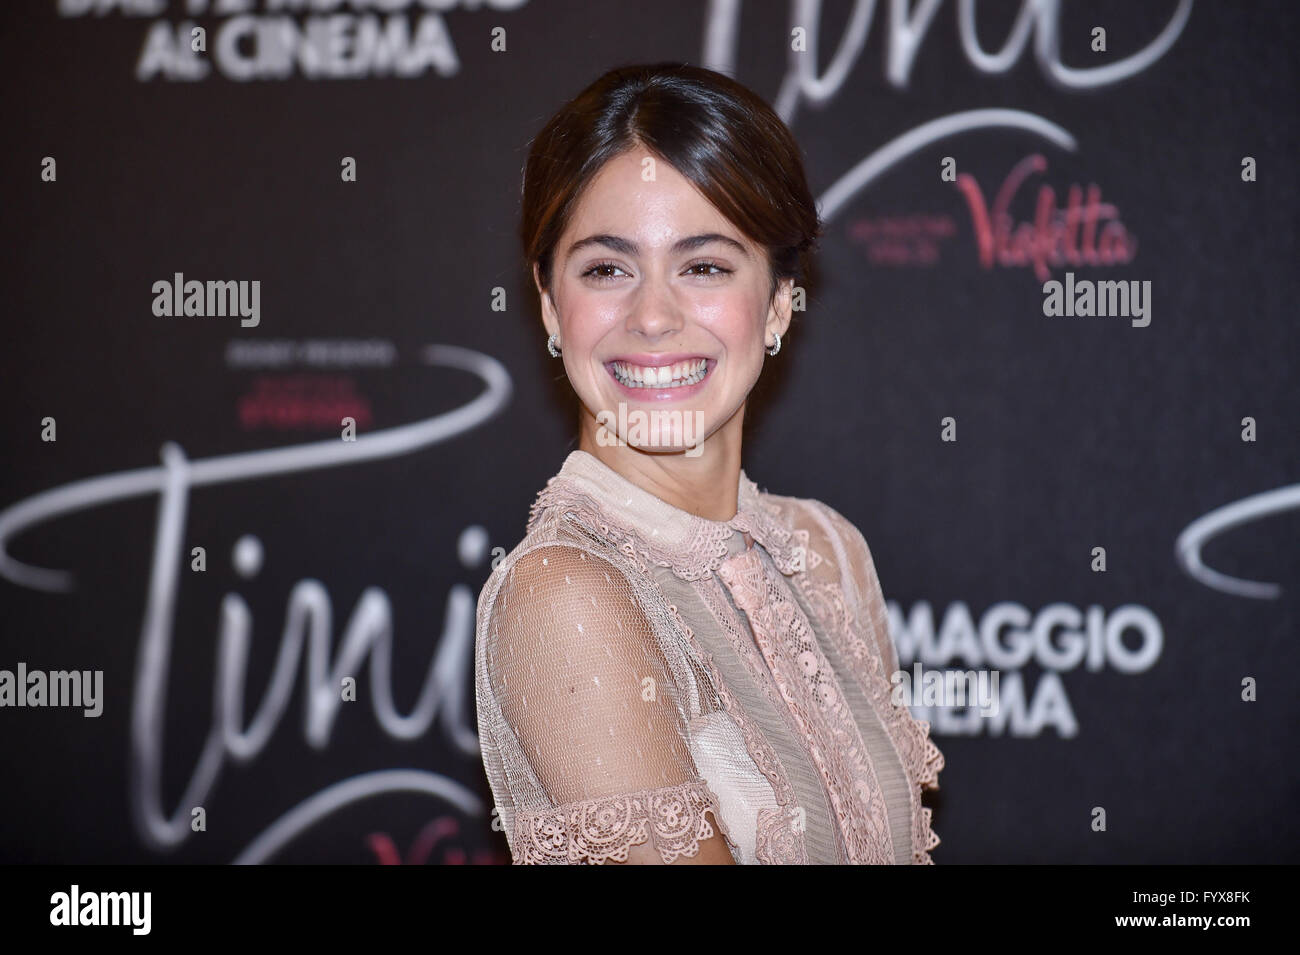 Rome, Italy. 29th April, 2016. Actress Martina Stoessel attends the Tini photocall at Grand Hotel Parco dei Principi in Rome Photo Credit:  Giuseppe Maffia/Alamy Live News Stock Photo